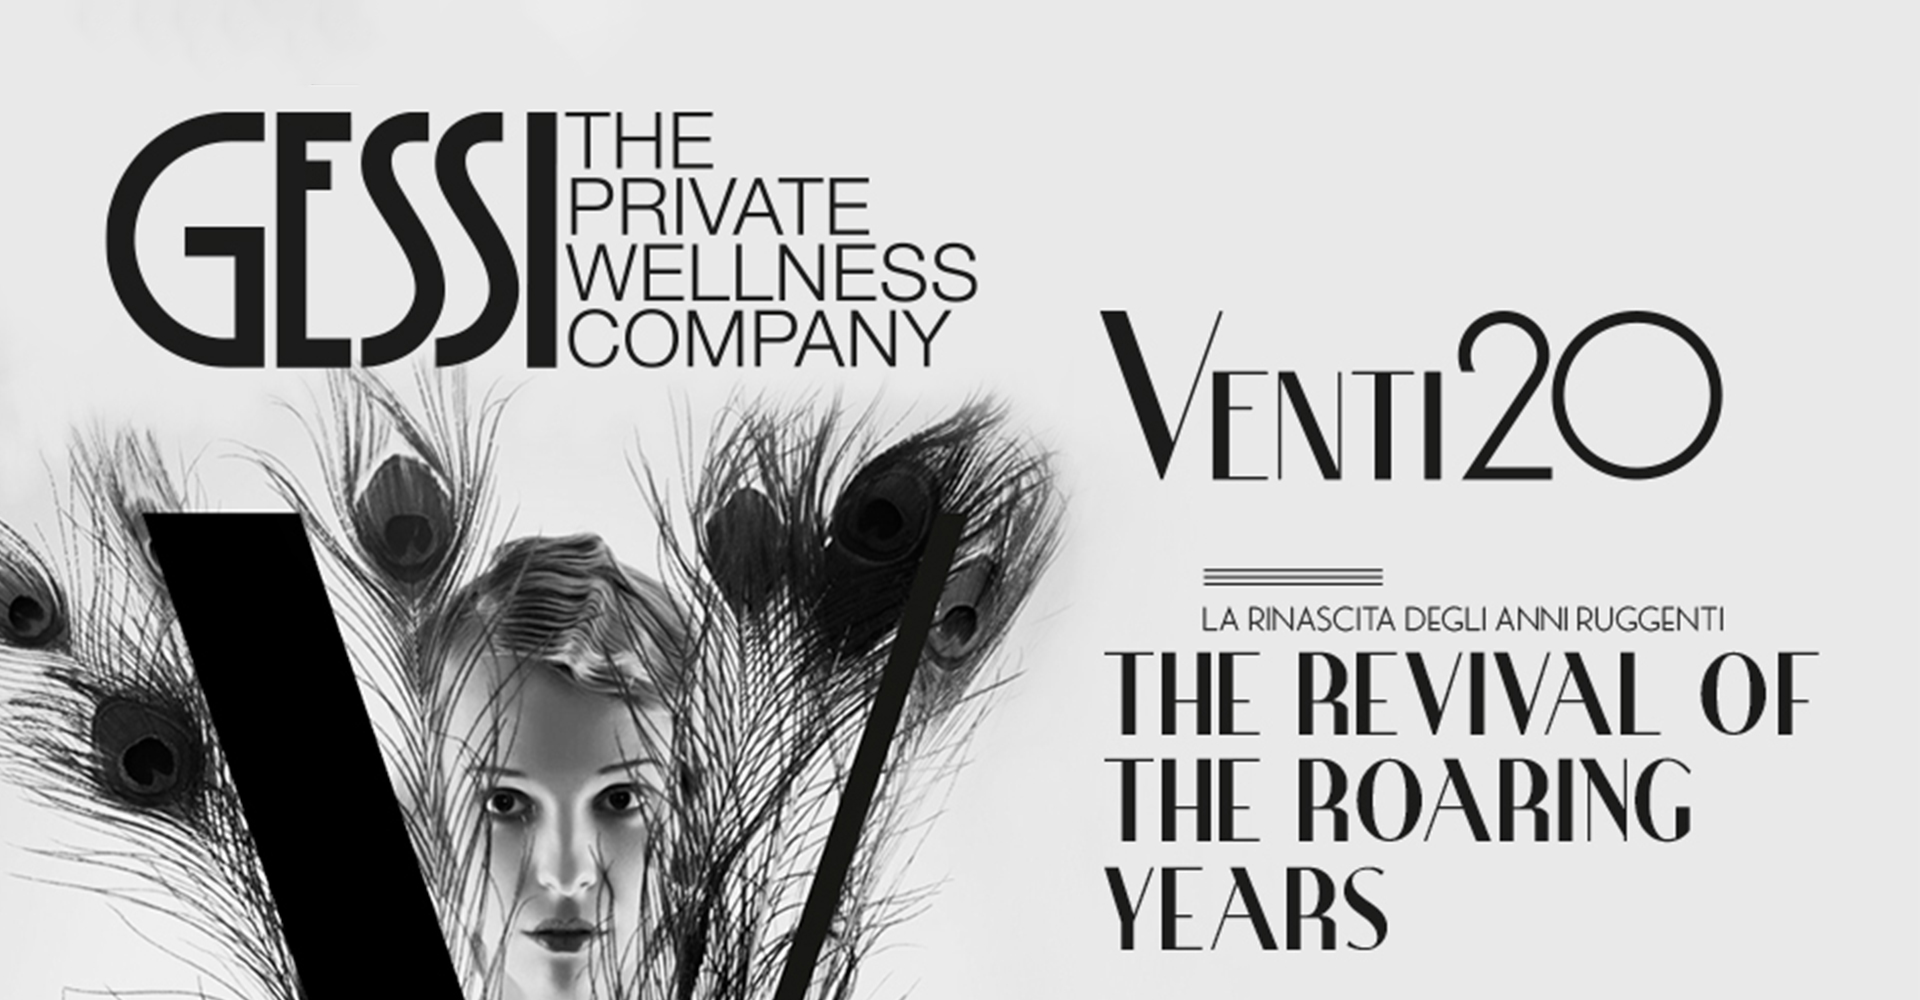 THE REVIVAL OF THE ROARING YEARS | Gessi 1